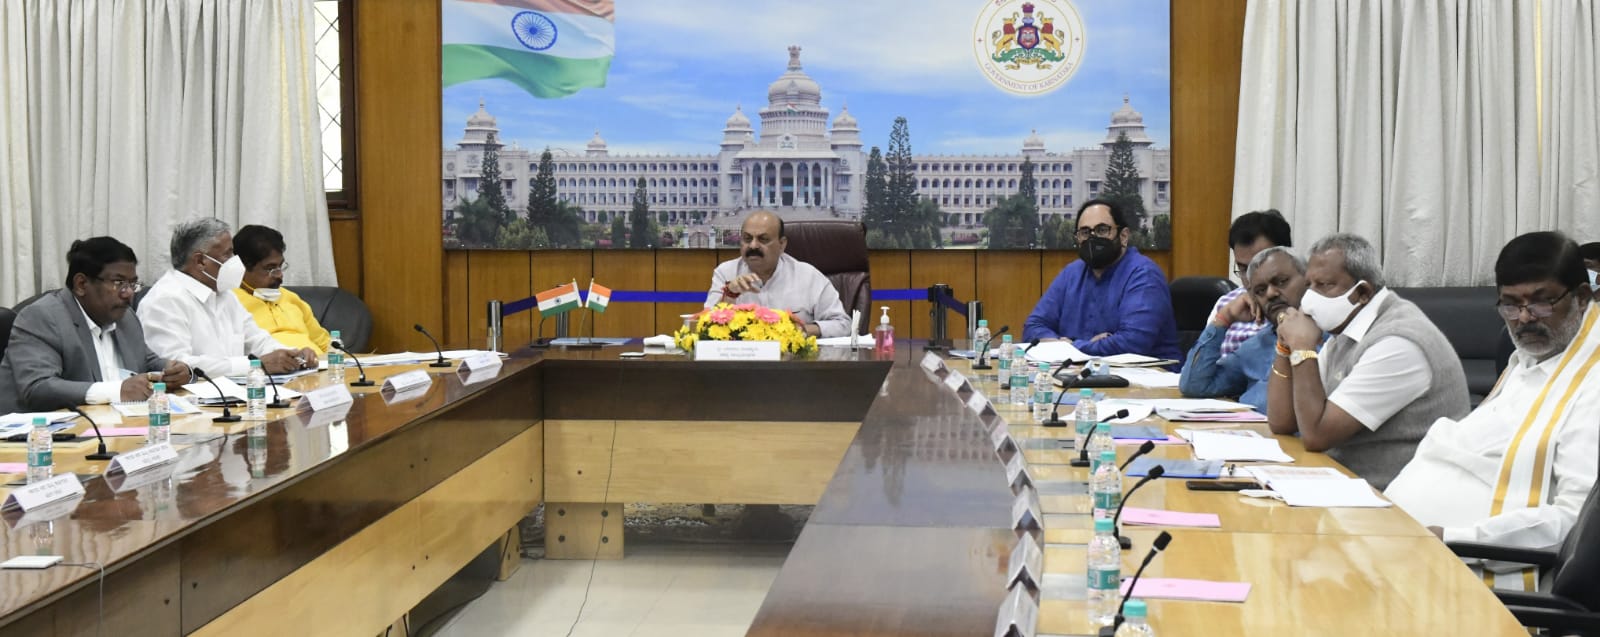 Karnataka CM announces formation of committee to look into Bengaluru's development comprising all departments